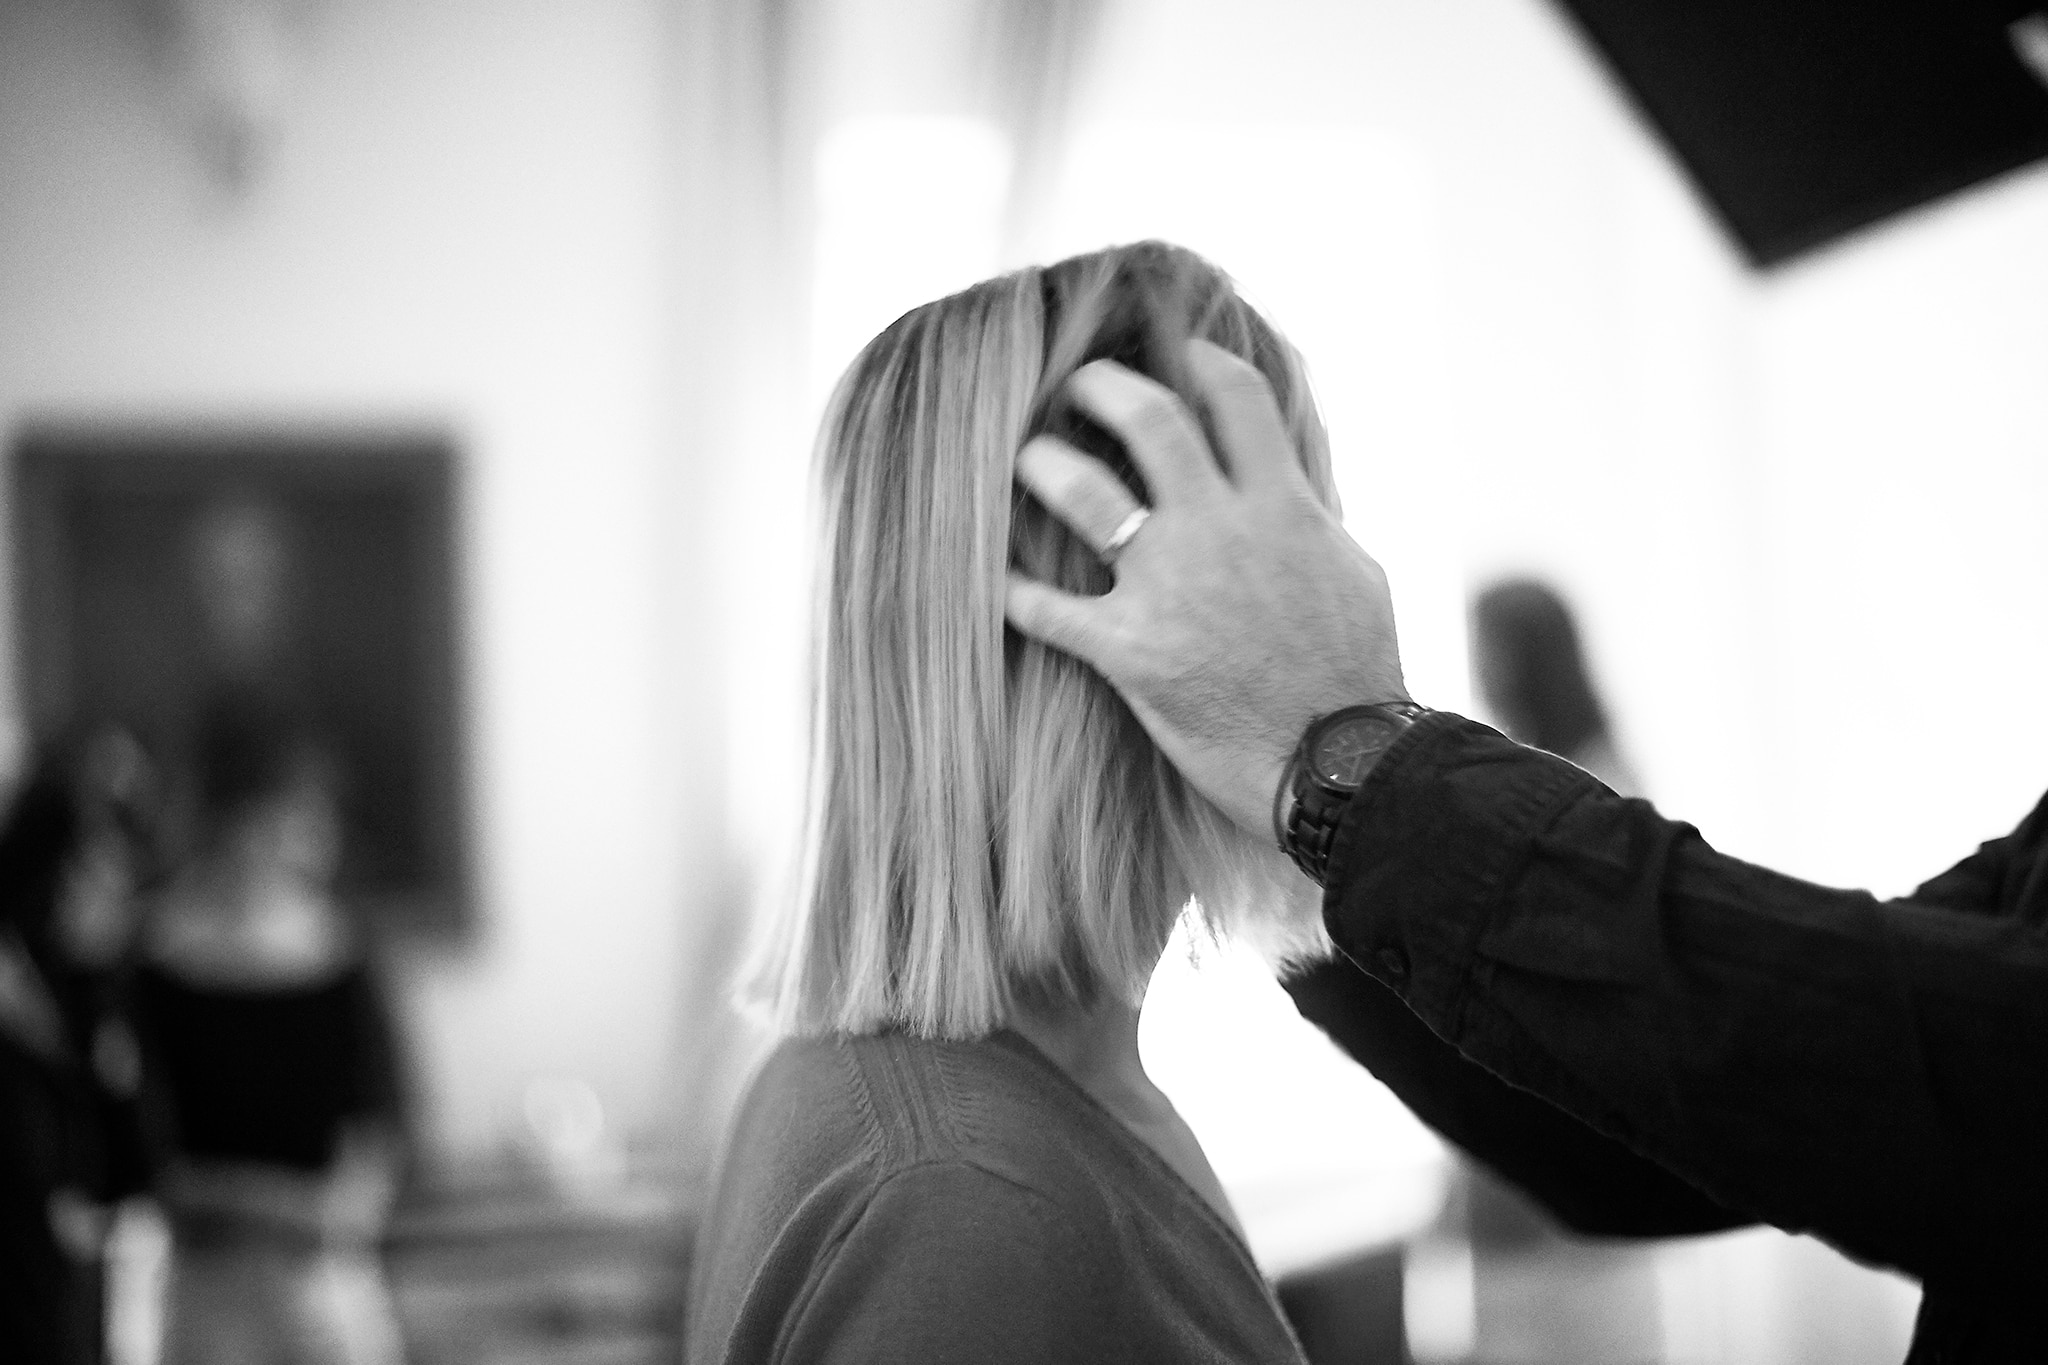 Designer Misha Nonoo with her hair being styled by a hairdresser